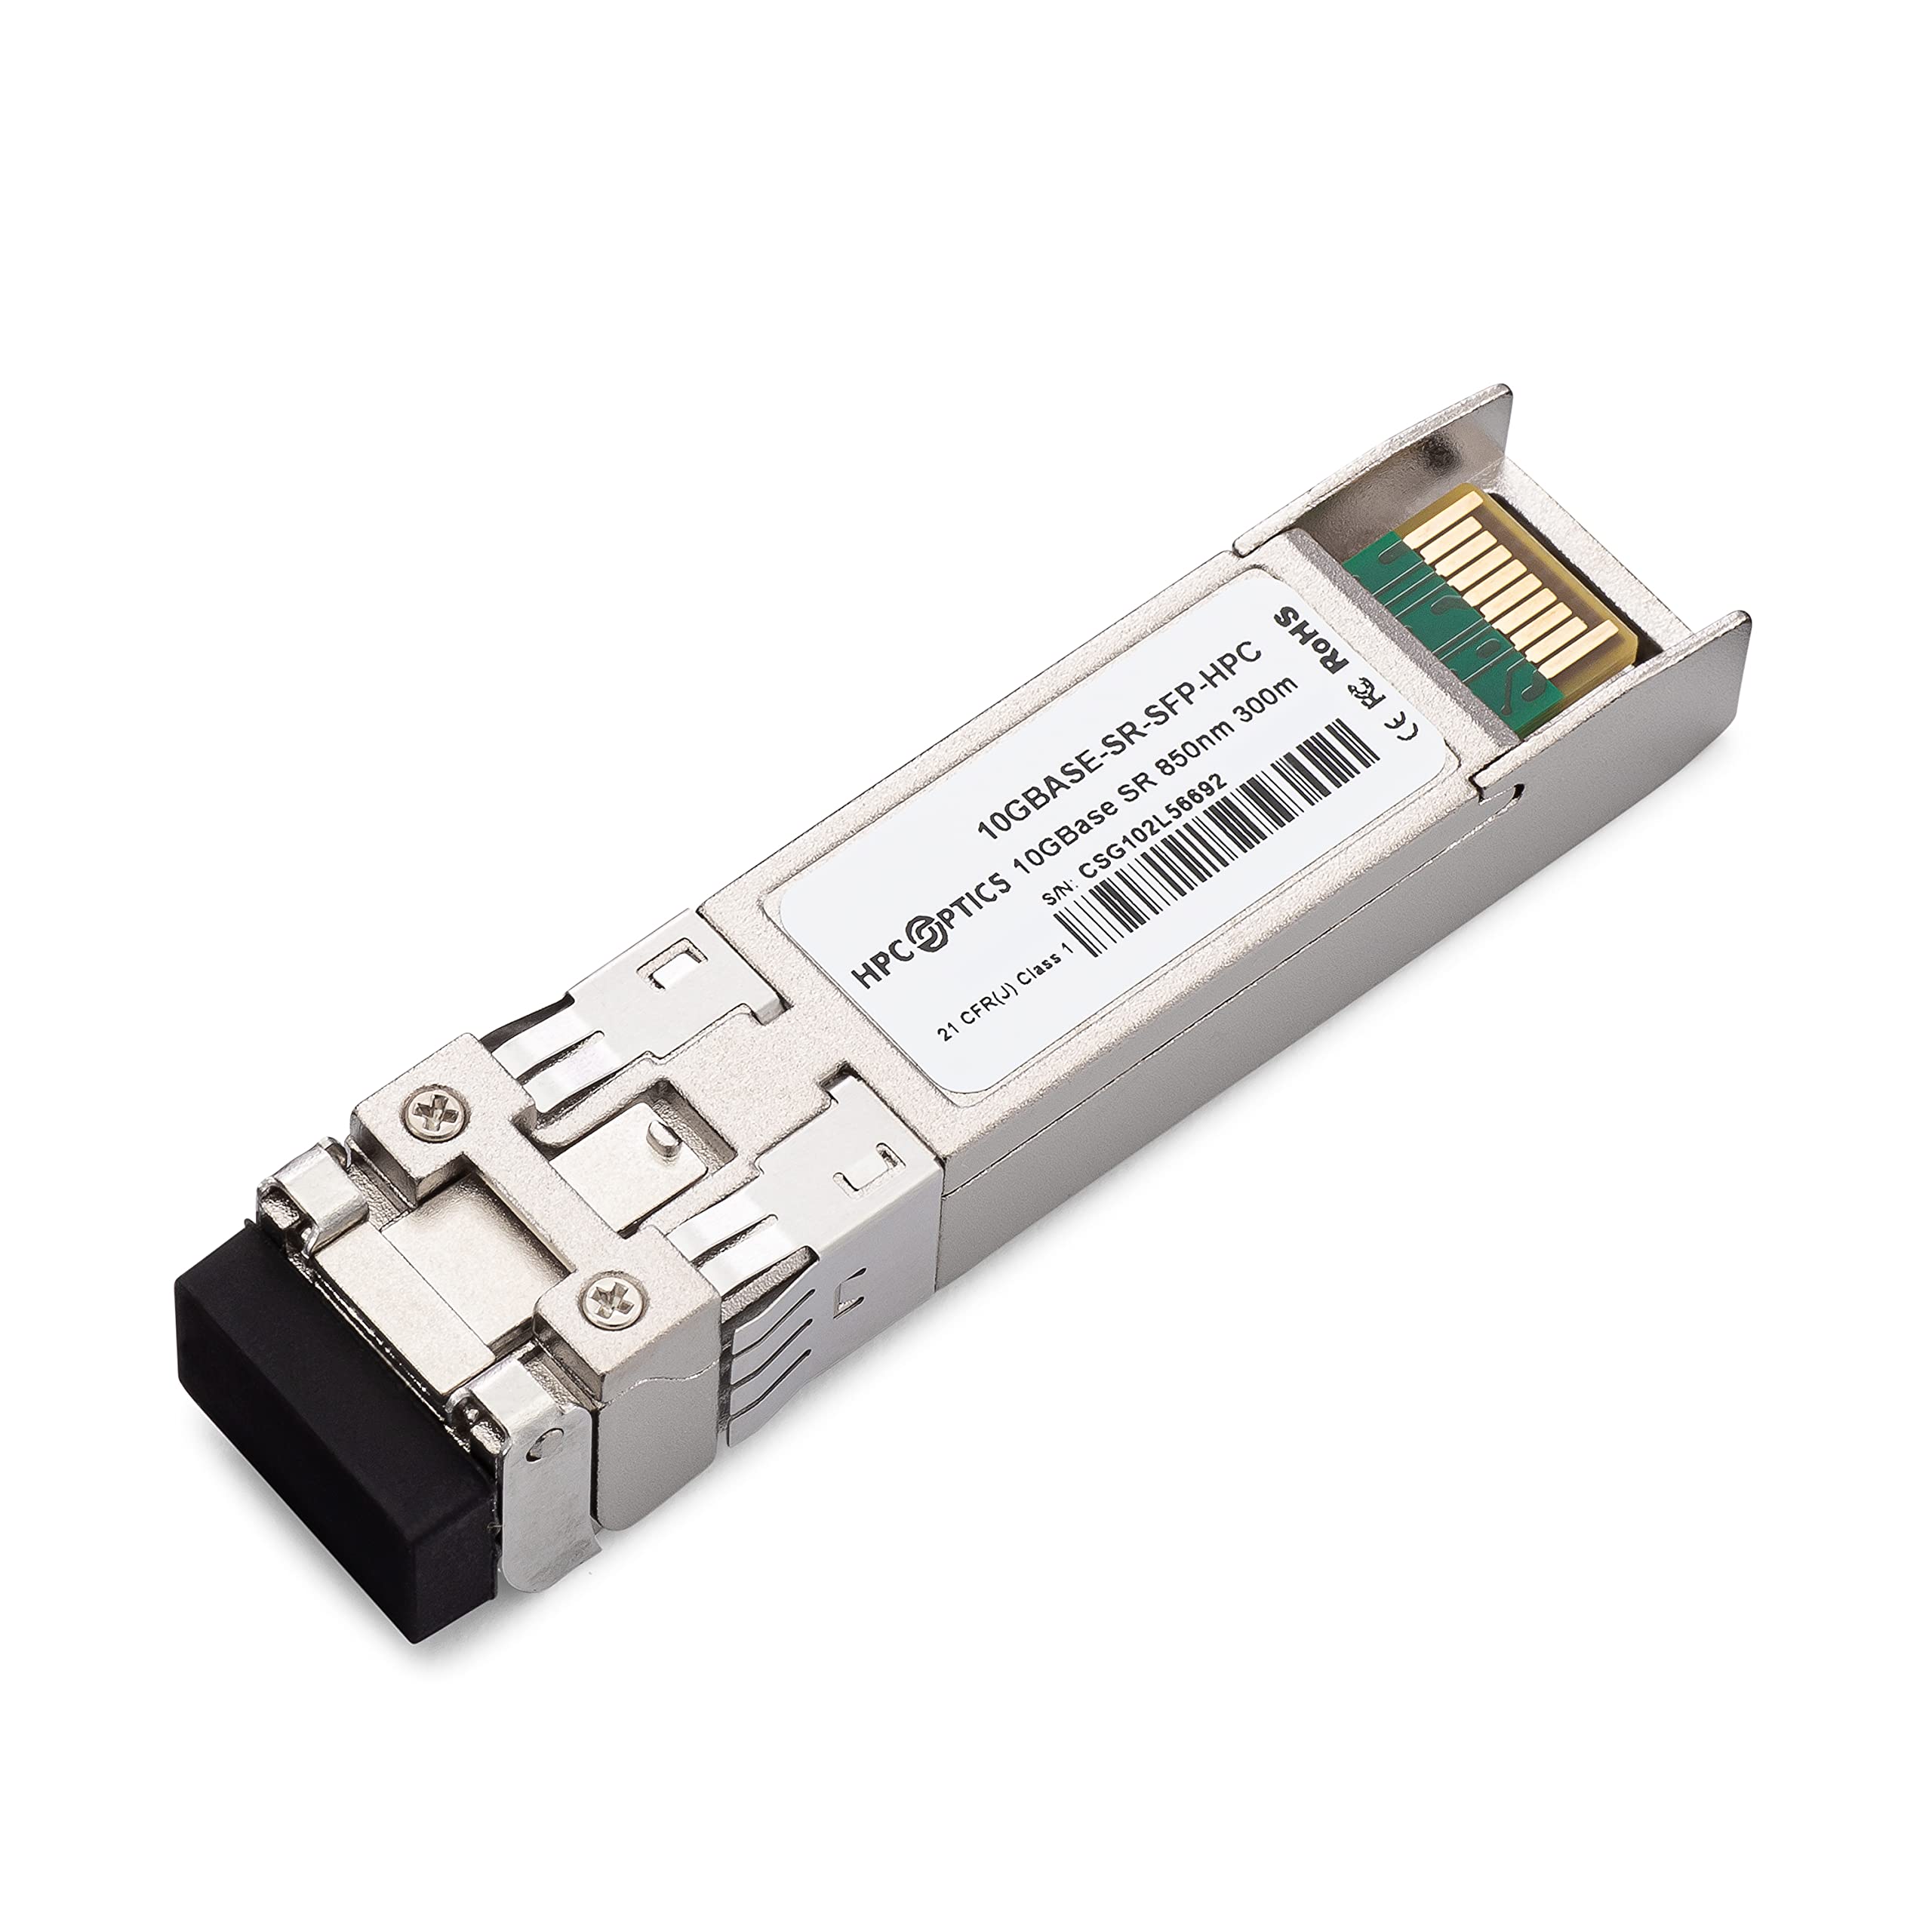 10Ge Sfp Transceiver Module Short Range For Systems With Sfp And SfpSfp Slots - FORTINET